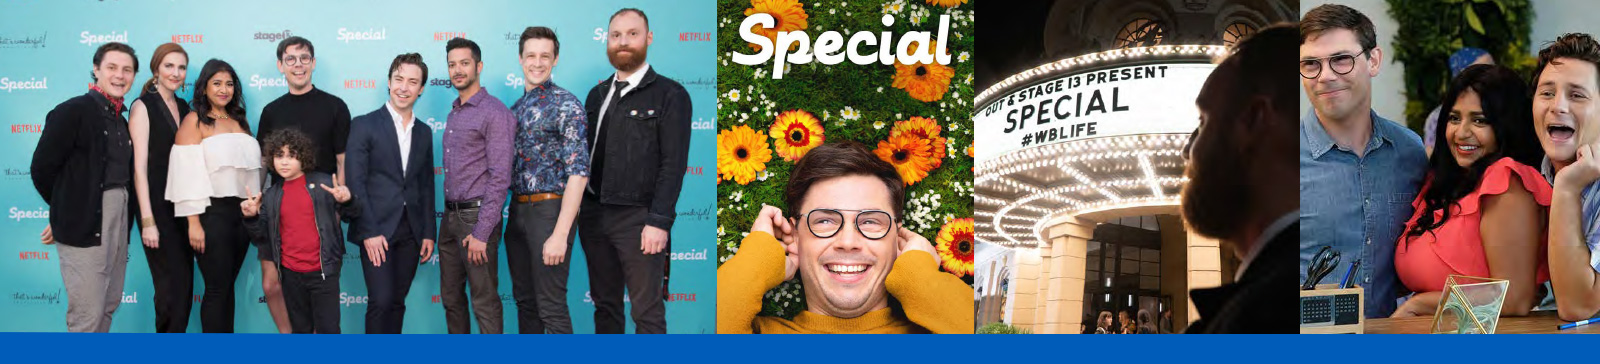 Cast photos from "Special", a WarnerMedia show about a man with mild cerebral palsy who decides to rewrite his identity. 